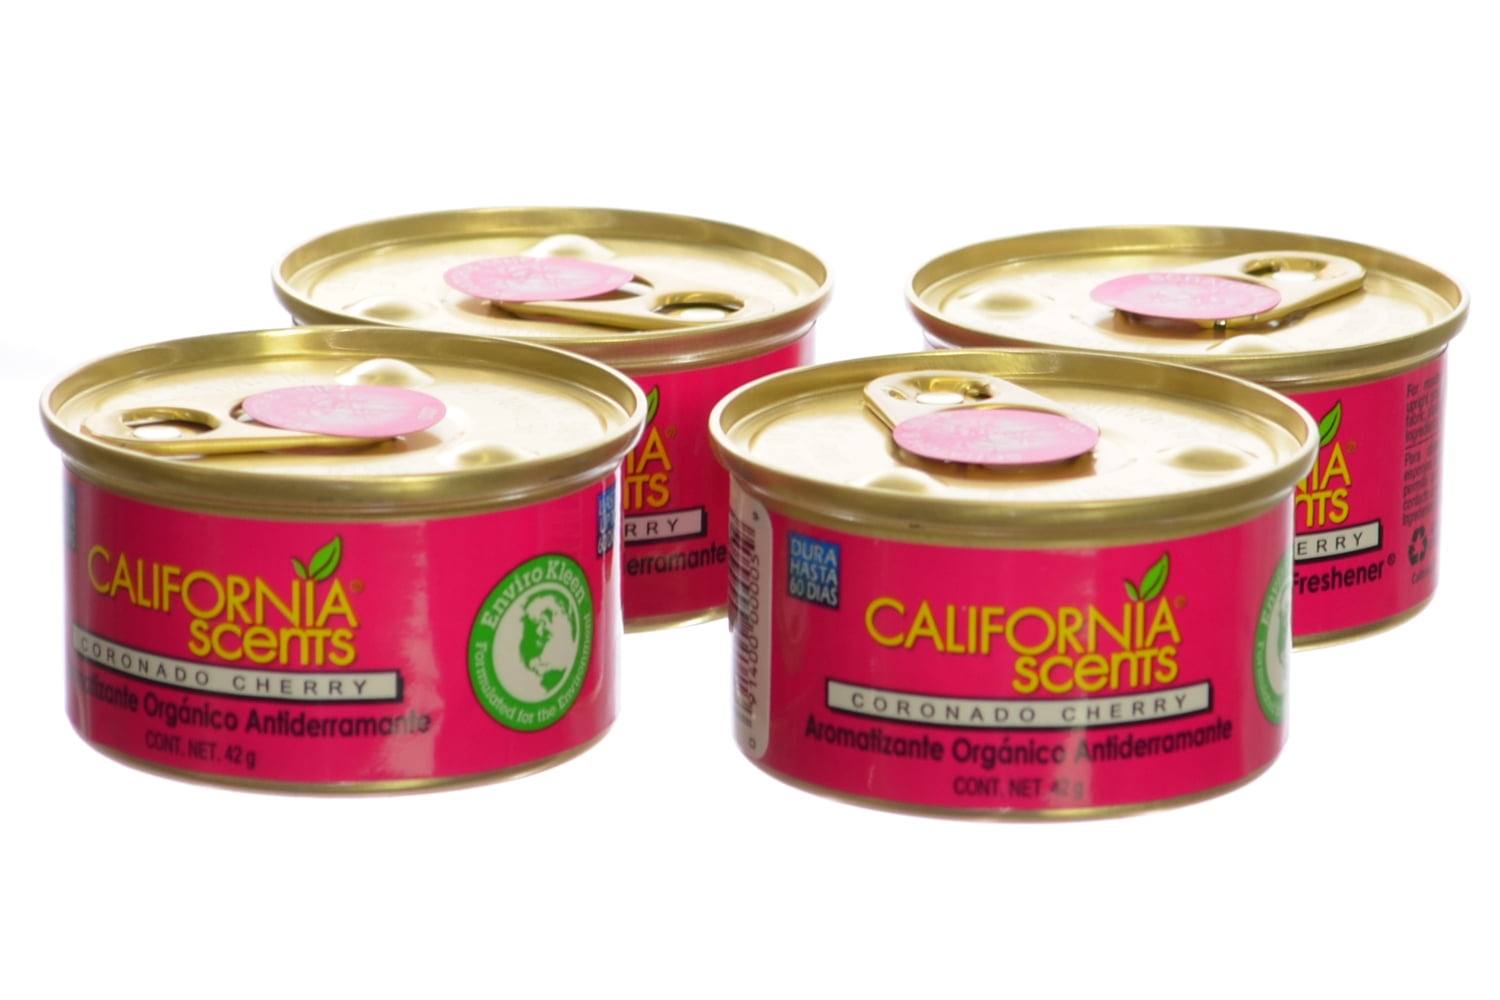 California Scents Car Home Organic Spill Proof Air Freshener Tin Can Multi  Packs